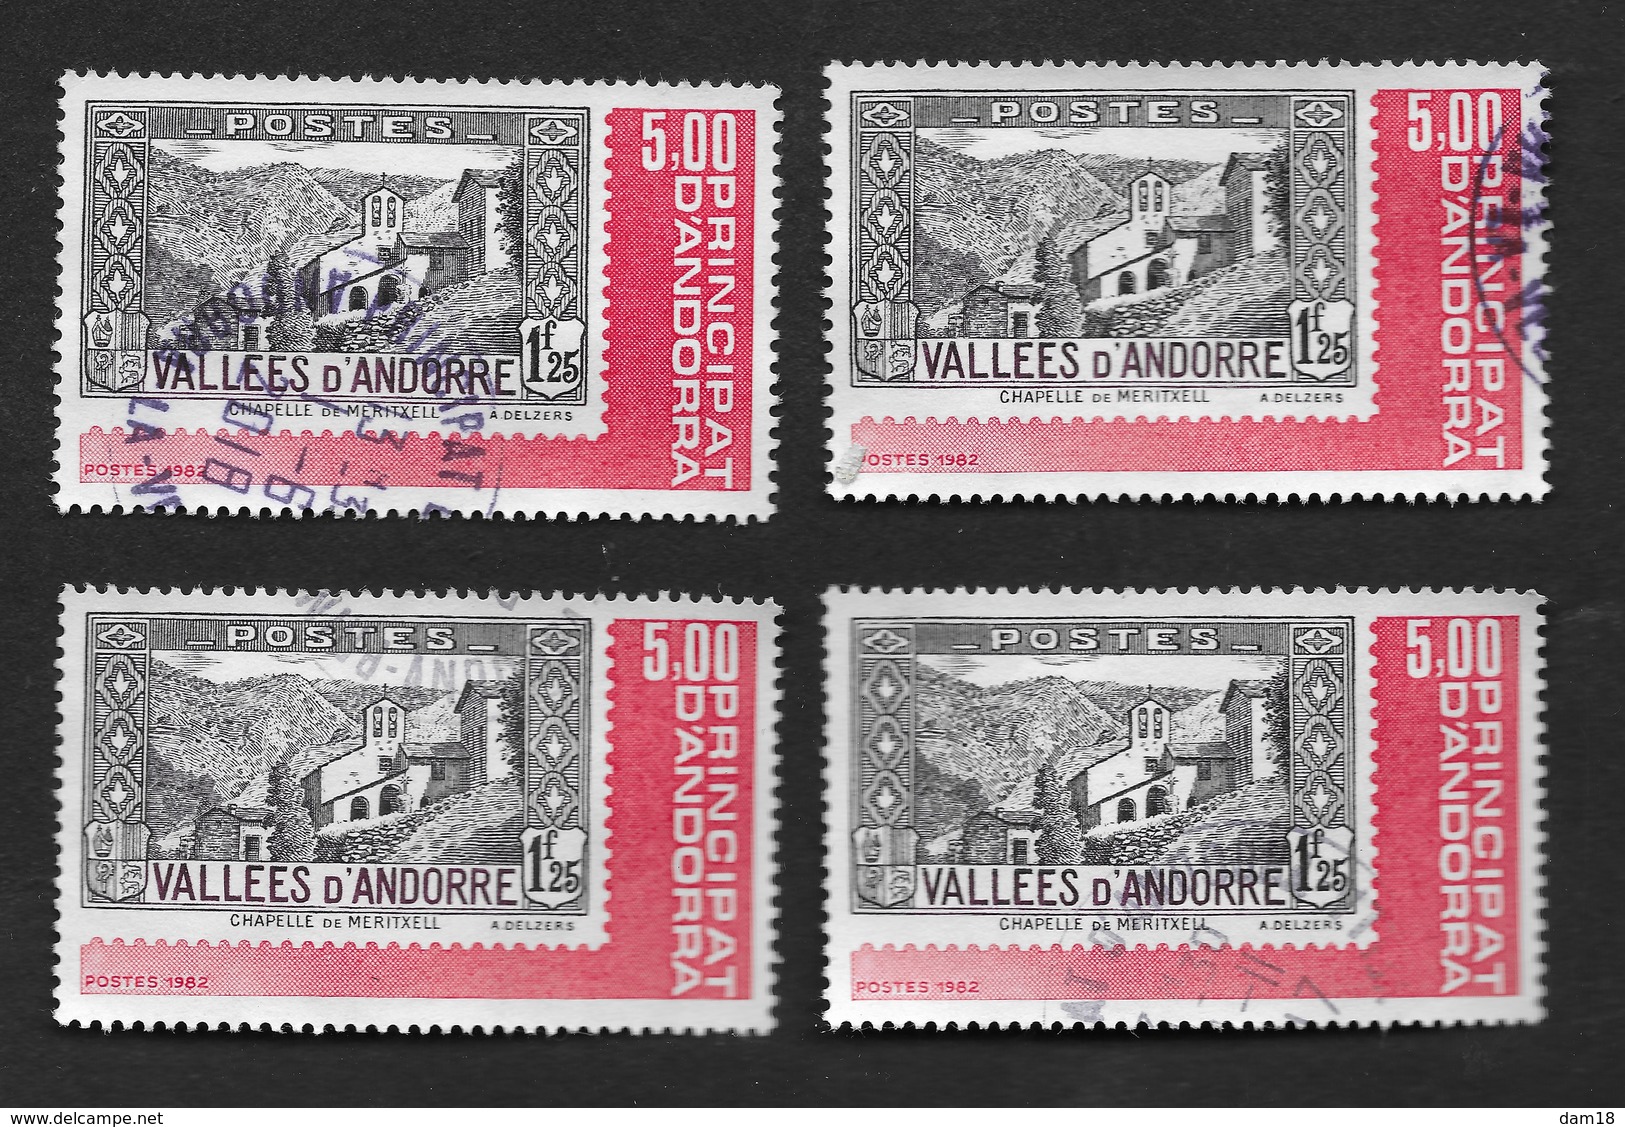 ANDORRE N° 304 X 4 EX. EXPOSITION 1982 TIMBRE SUR TIMBRE CHAPELLE MERITXELL - Usados